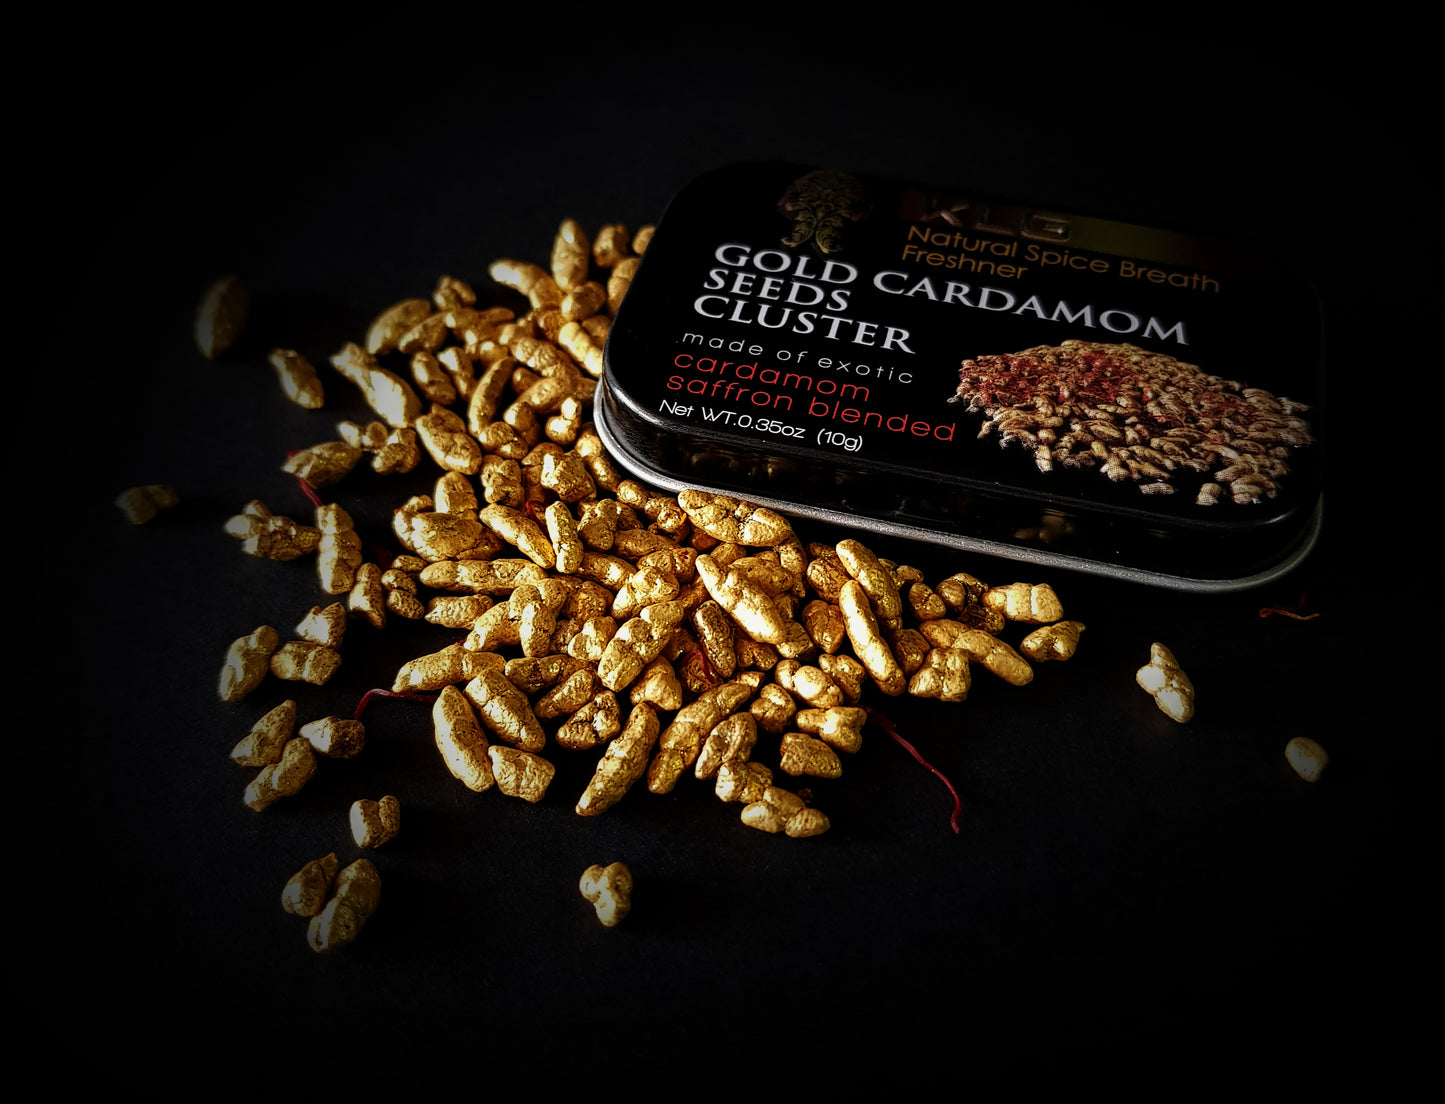 Gold Cardamom Seeds Cluster Case (144pc)